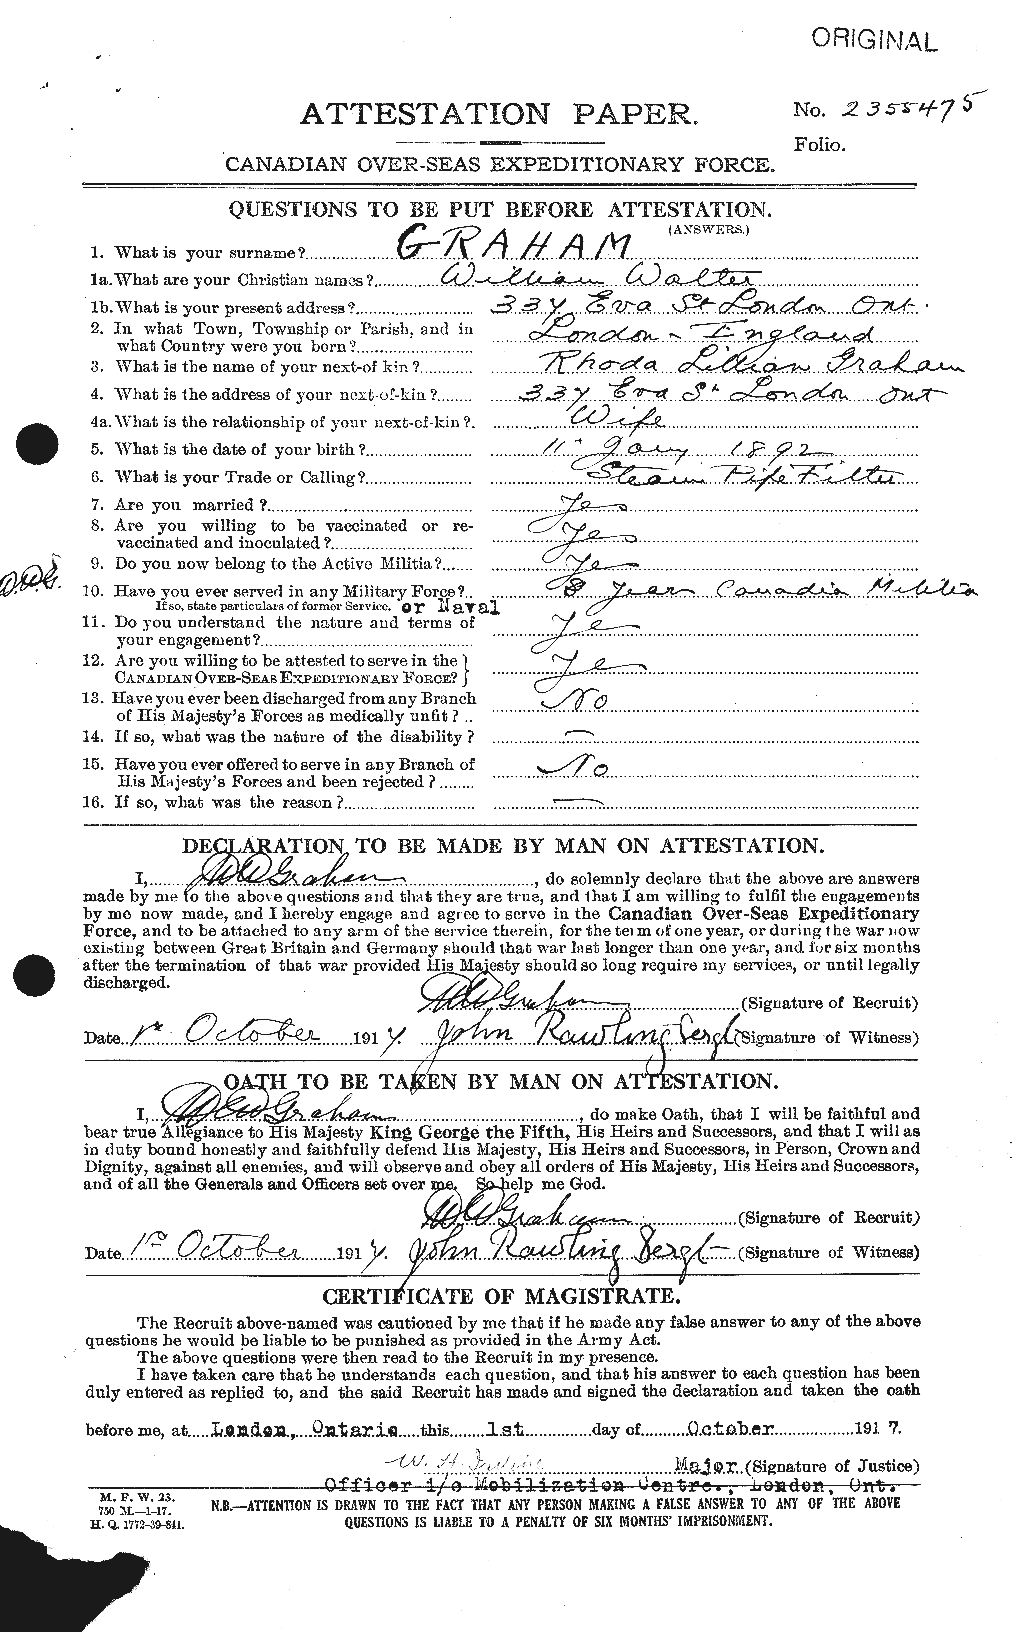 Personnel Records of the First World War - CEF 358046a